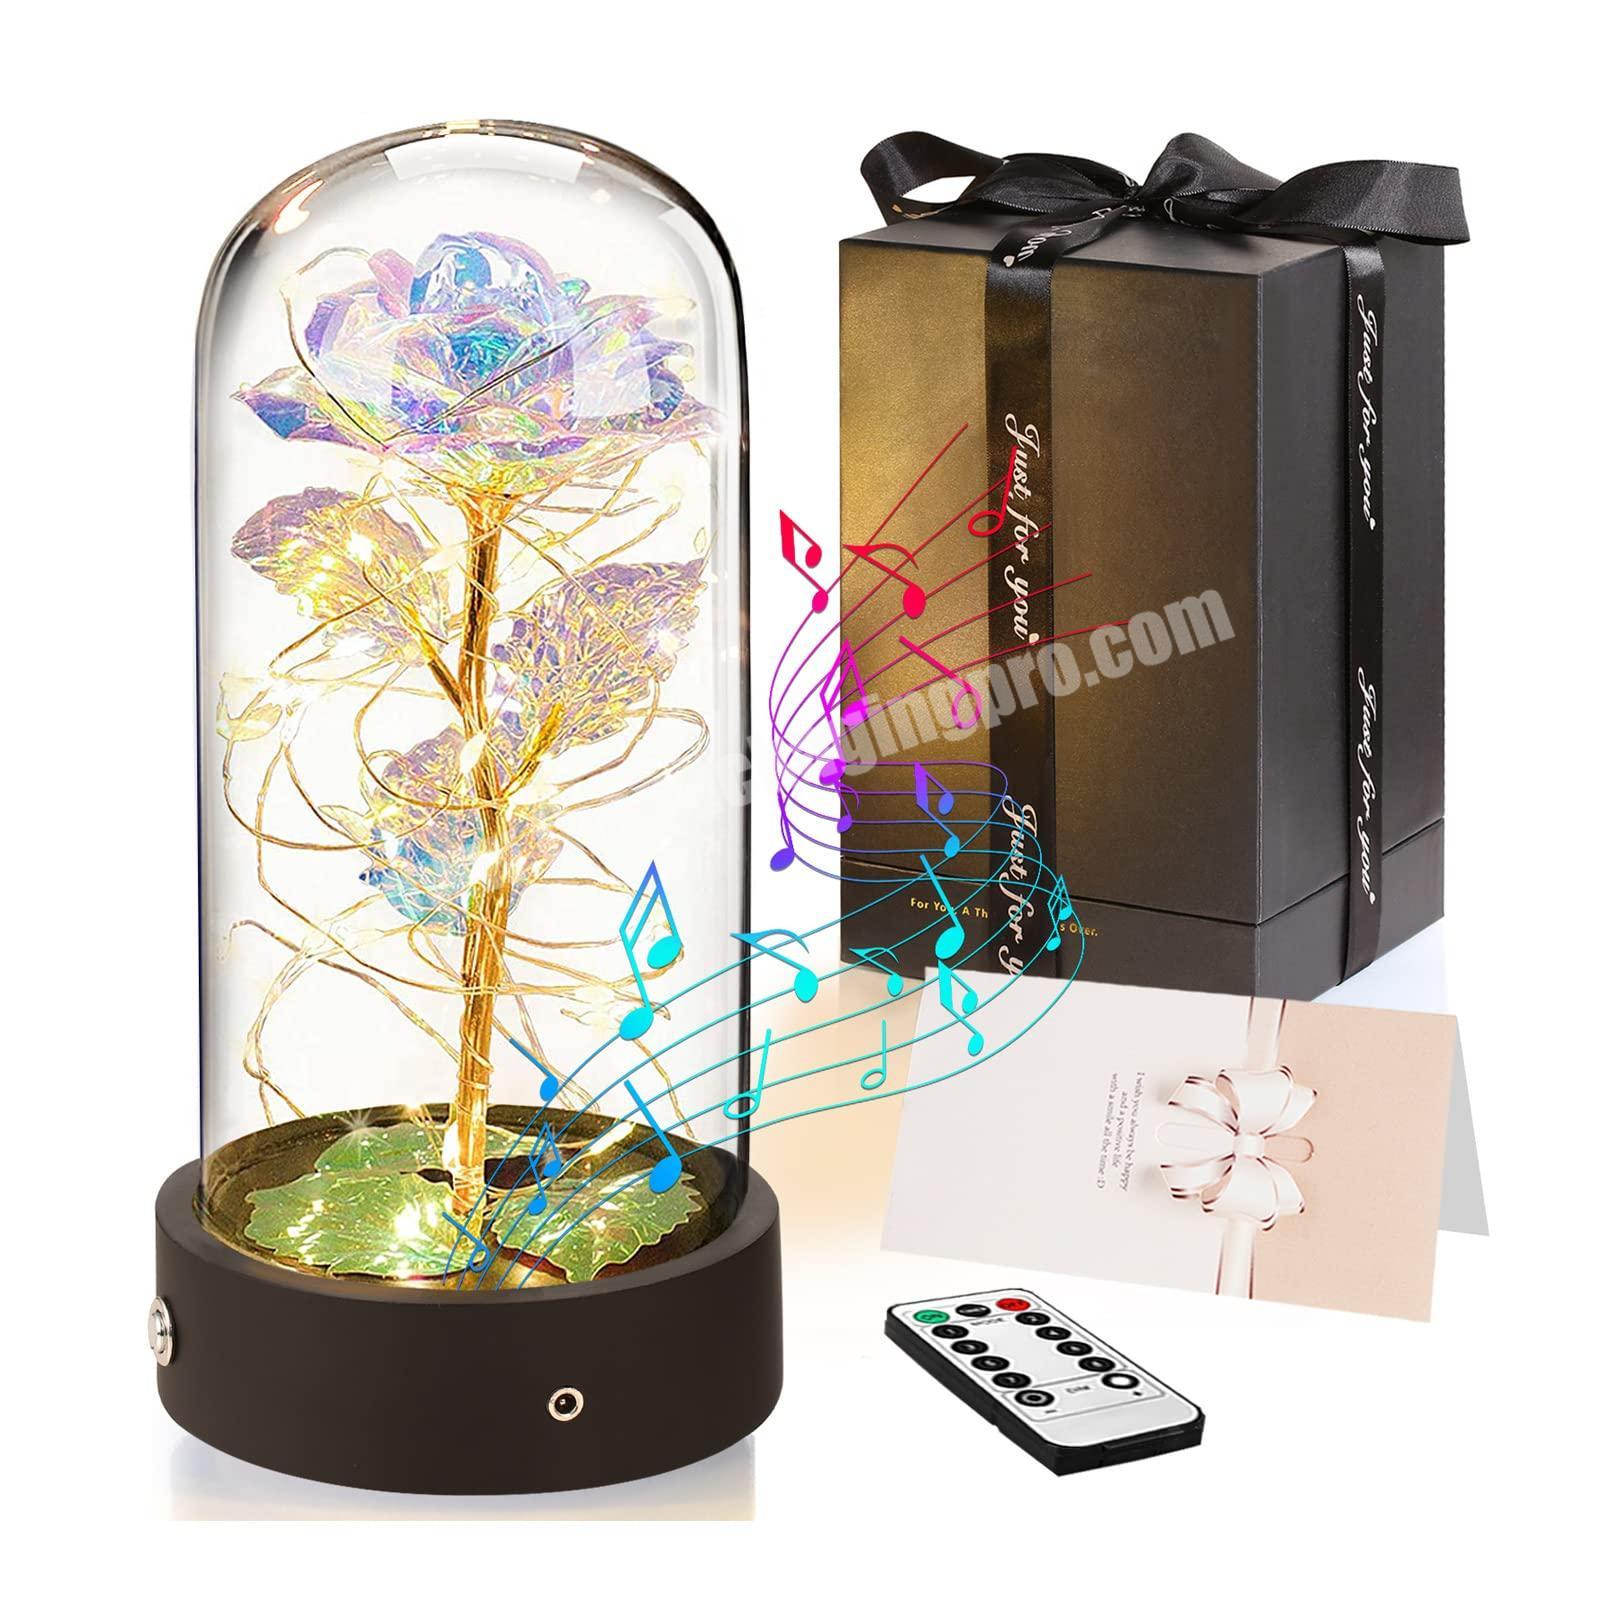 Luxury rose flower in glass dome golden led galaxy rose flower gift packaging box for wedding anniversary Valentine's Day gift